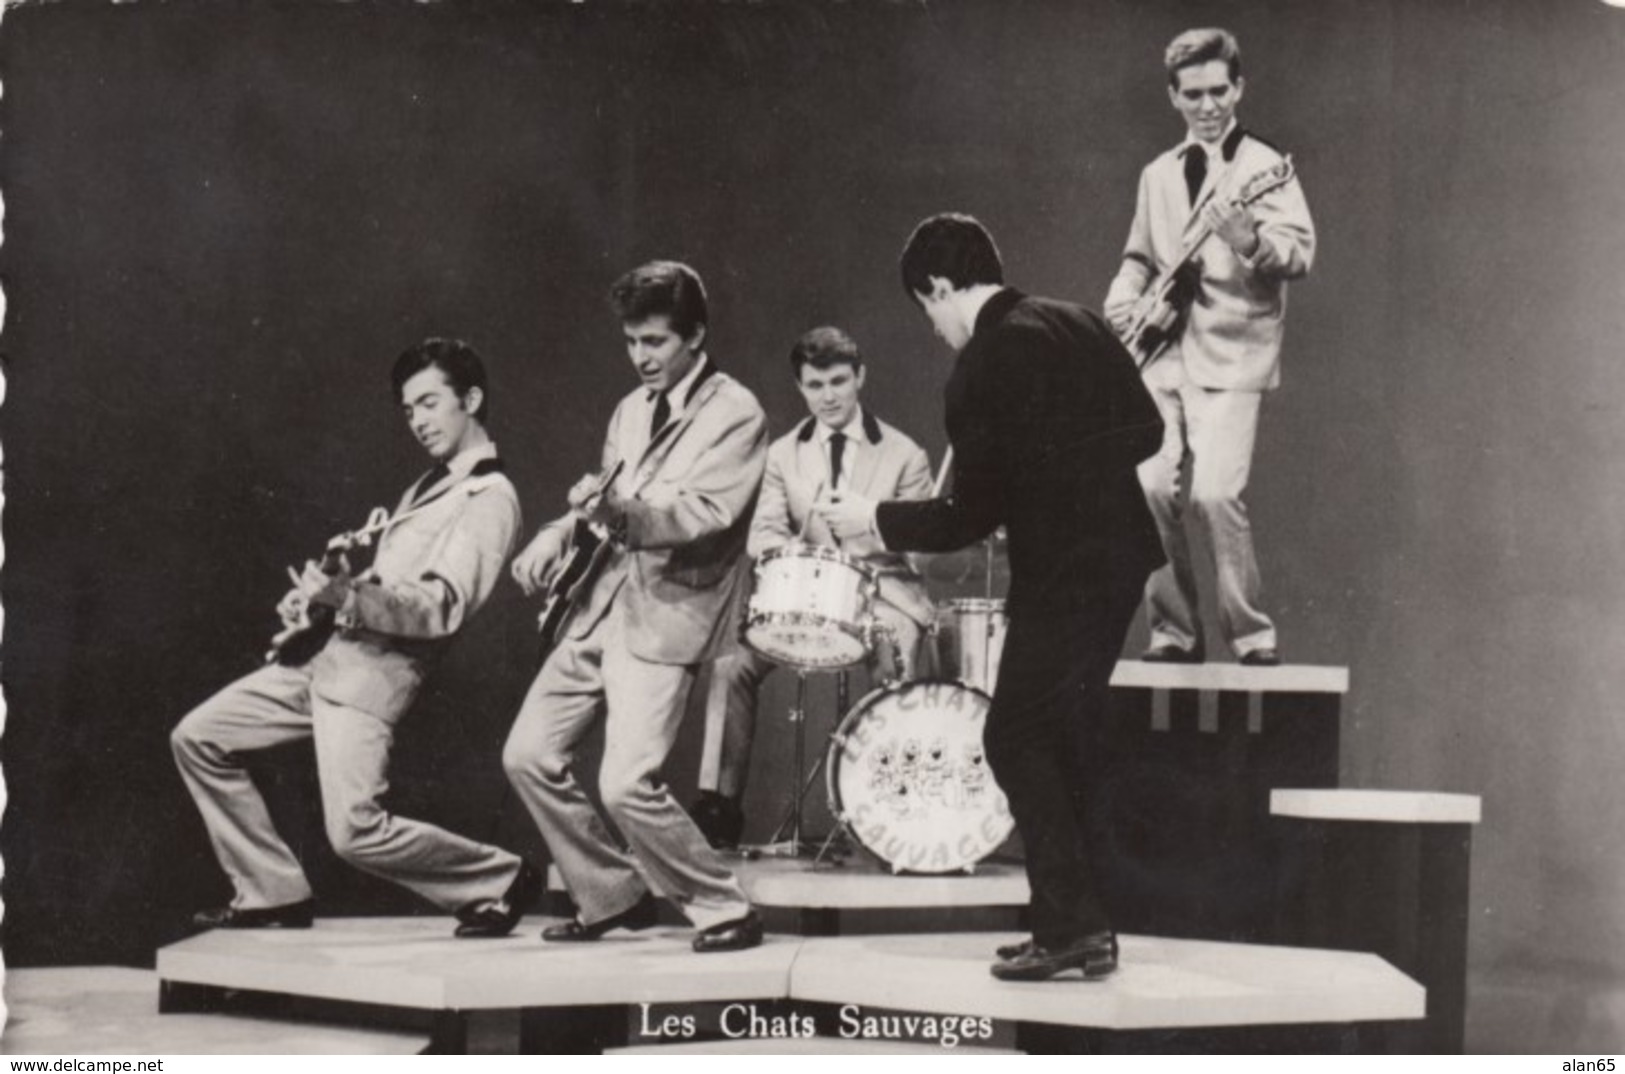 Les Chats Sauvage, French Rock Band Musicians C1960s Vintage Real Photo Postcard - Music And Musicians